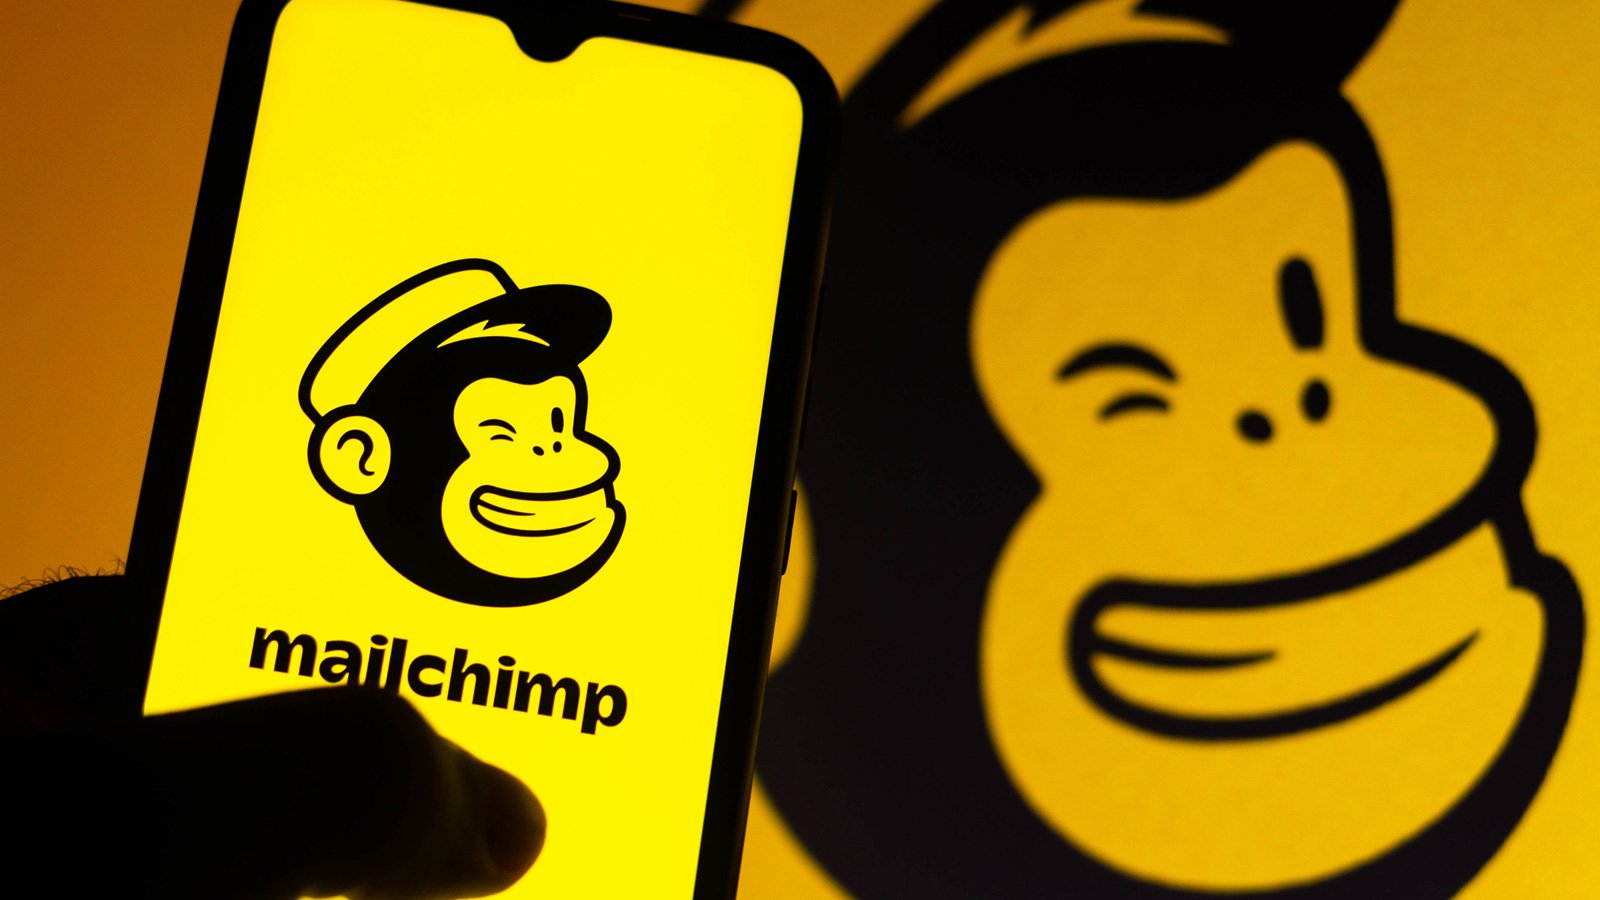 MailChimp discloses new breach after employees got hacked